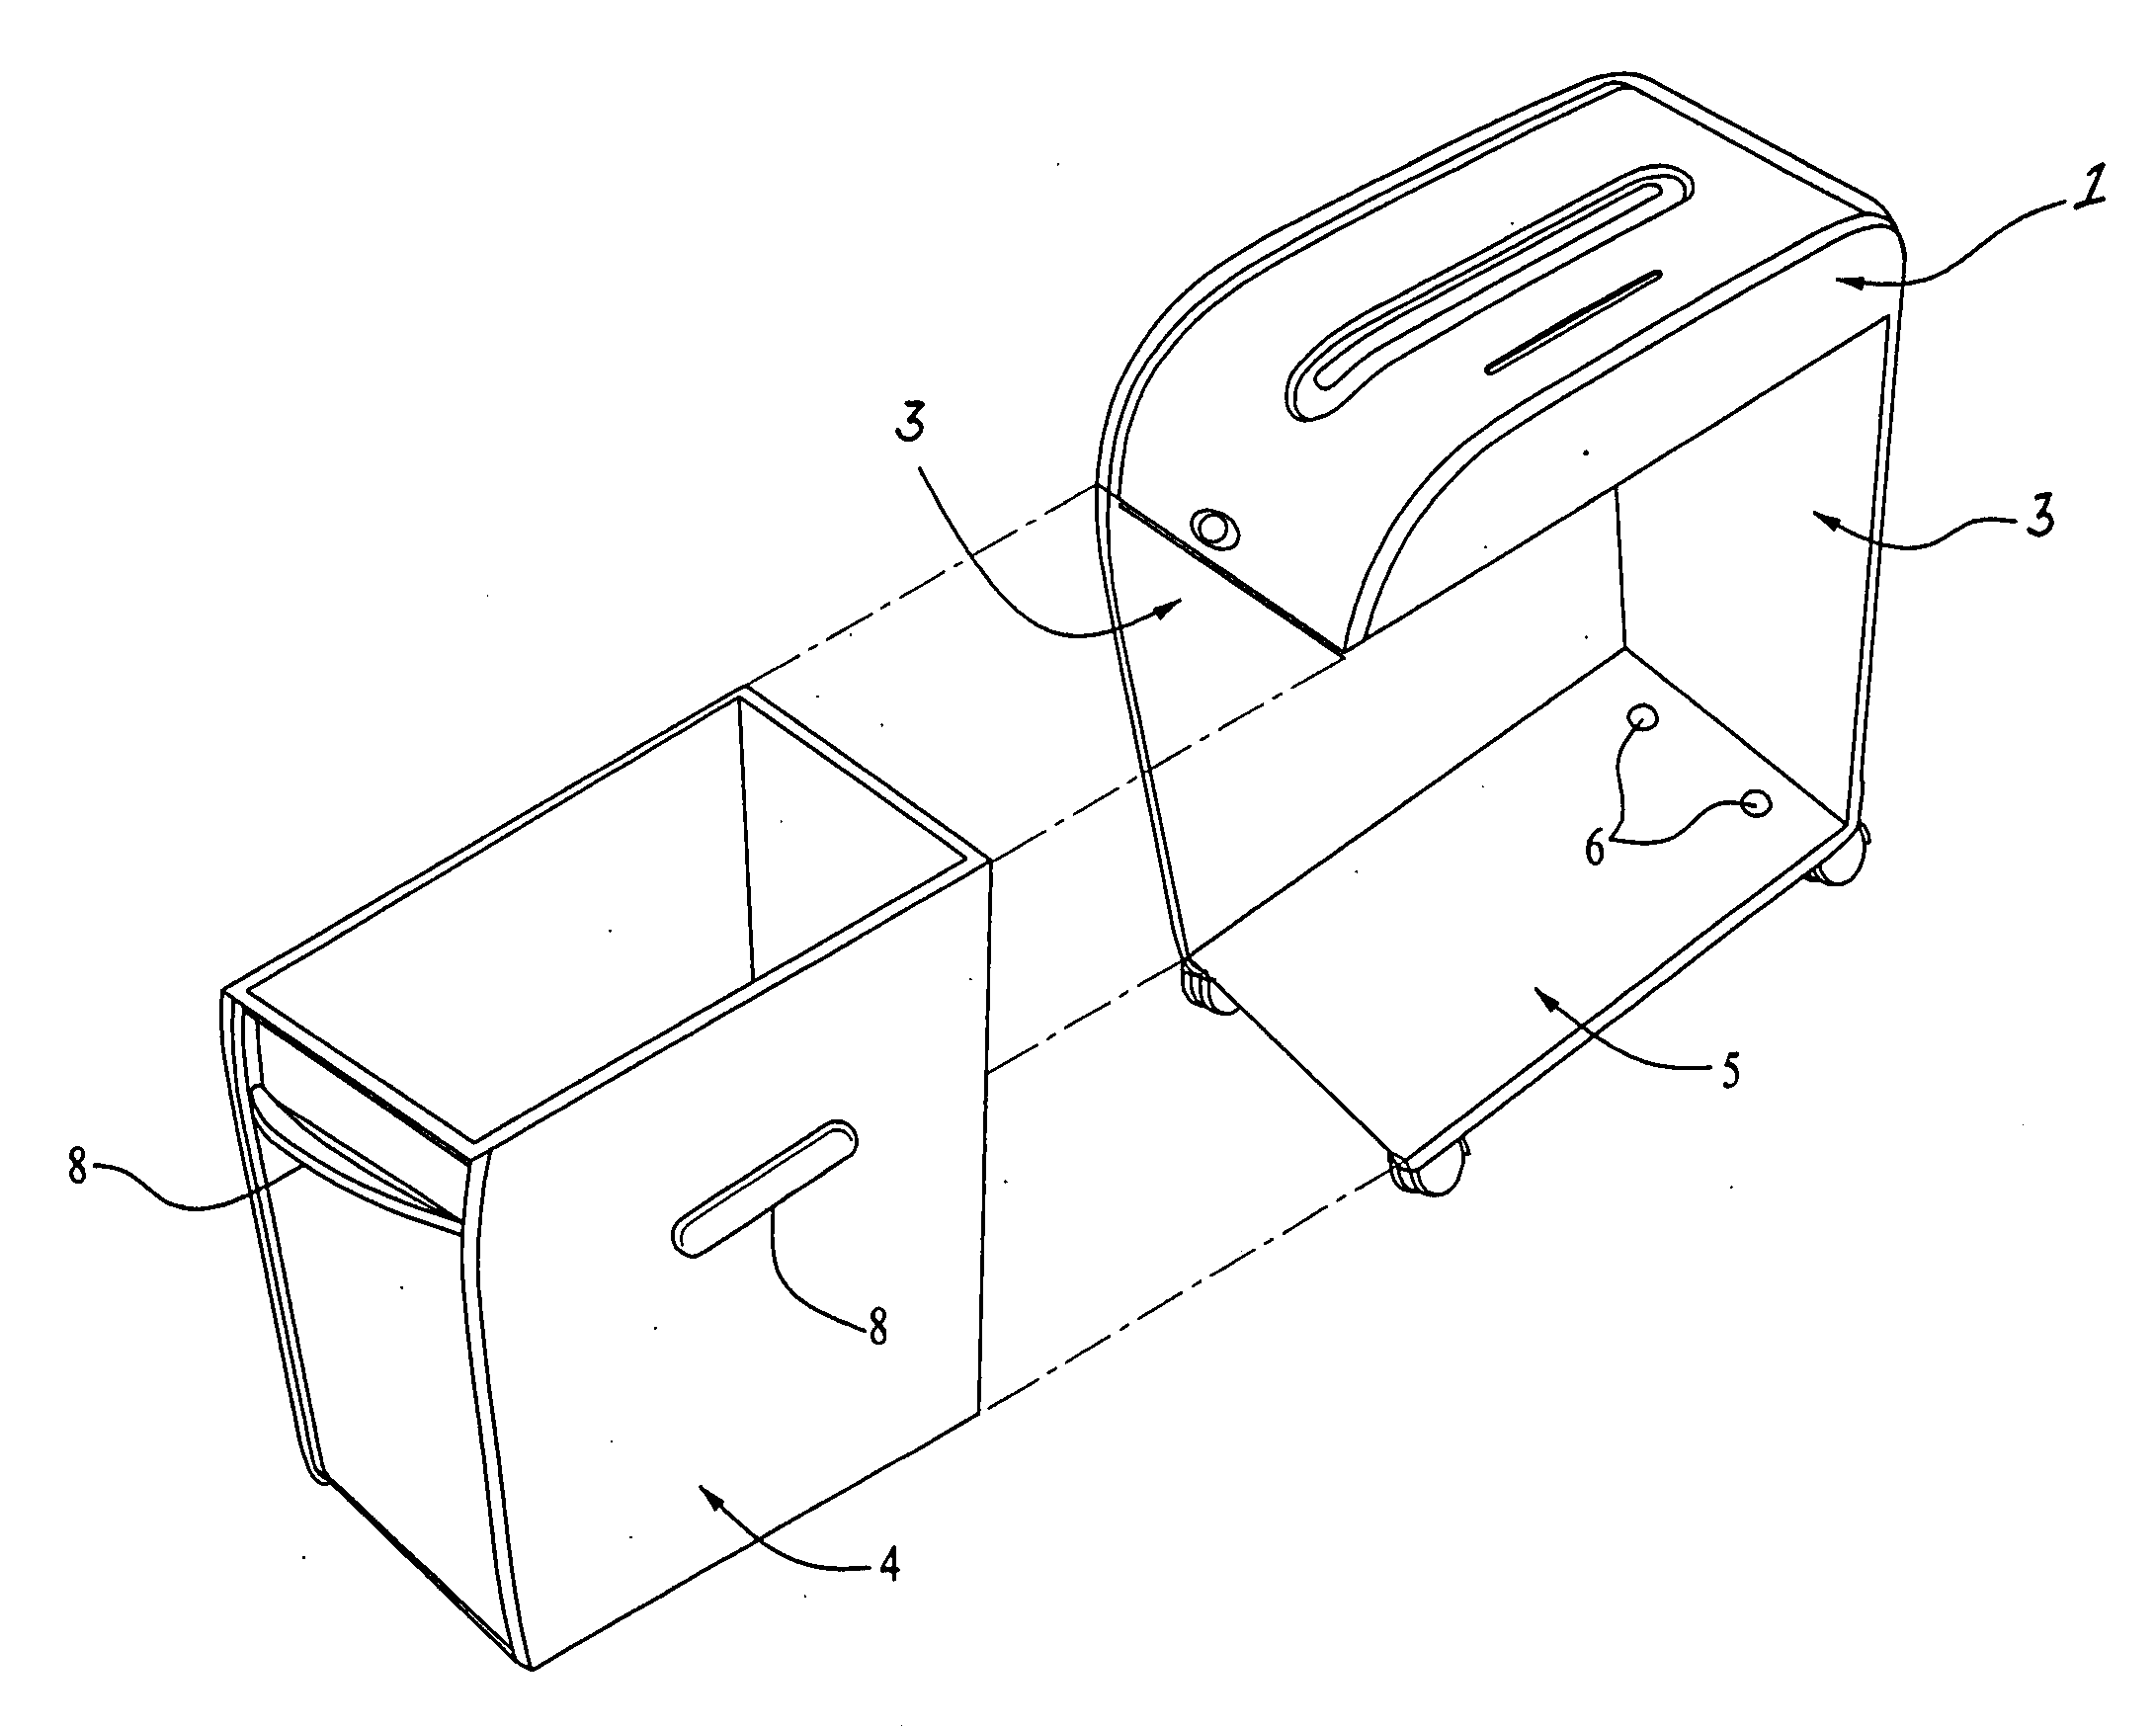 Shredder support and waste receptacle